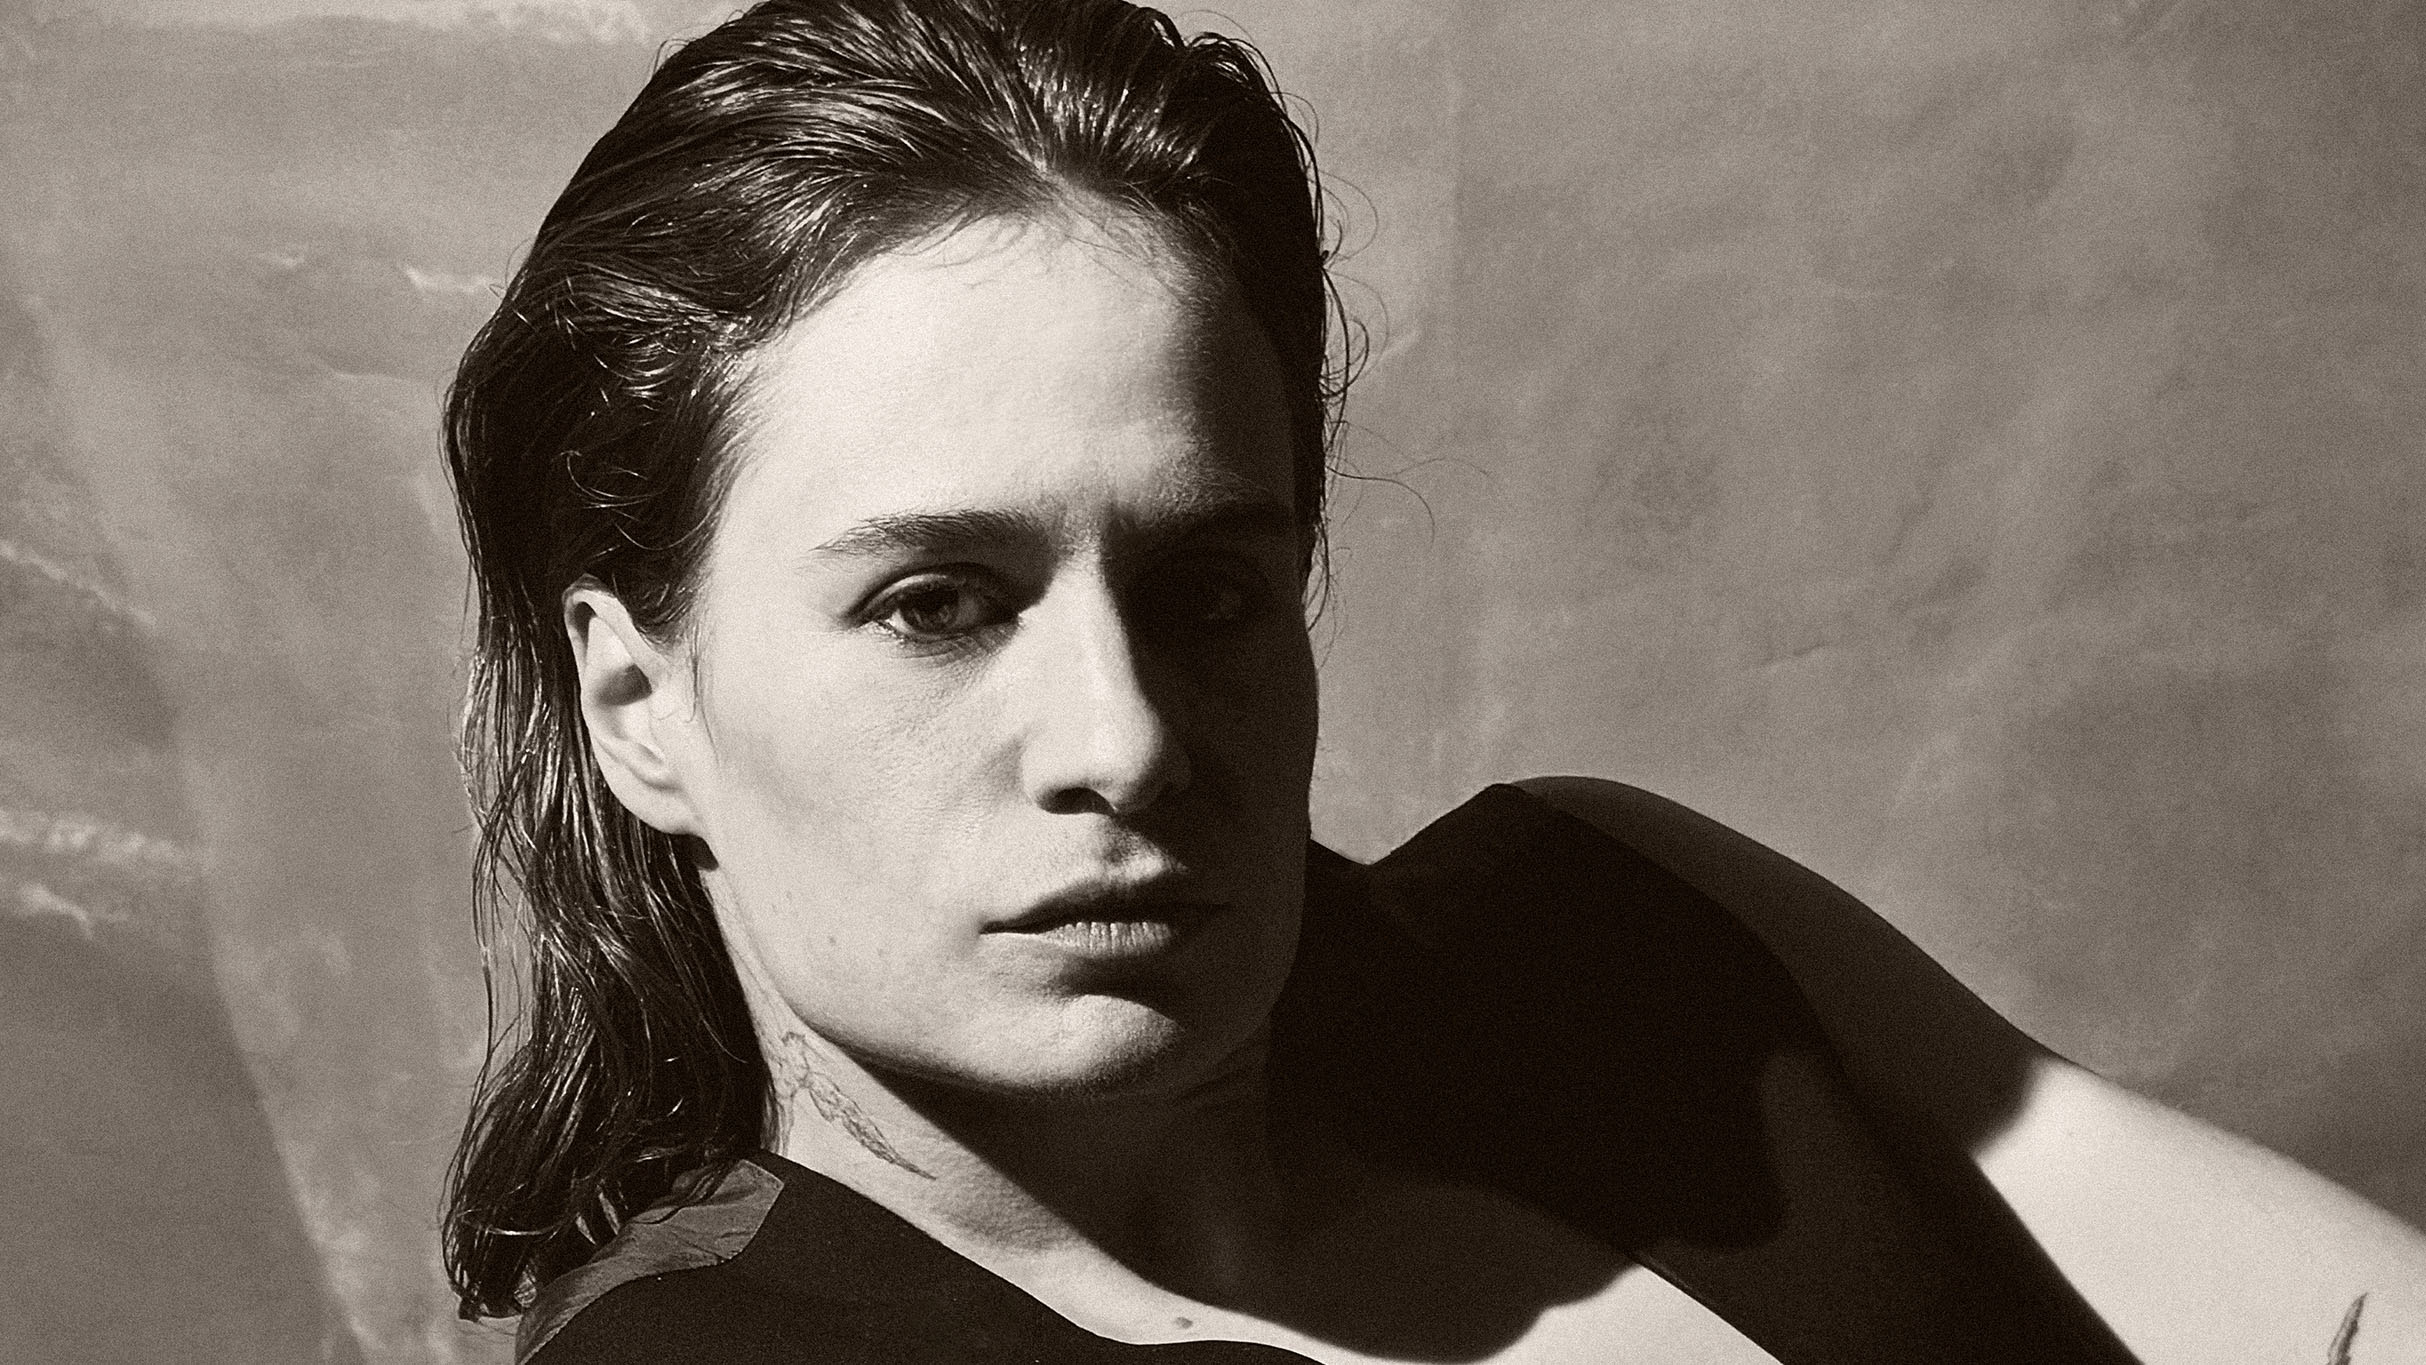 Christine and the Queens in San Diego promo photo for AEG presale offer code